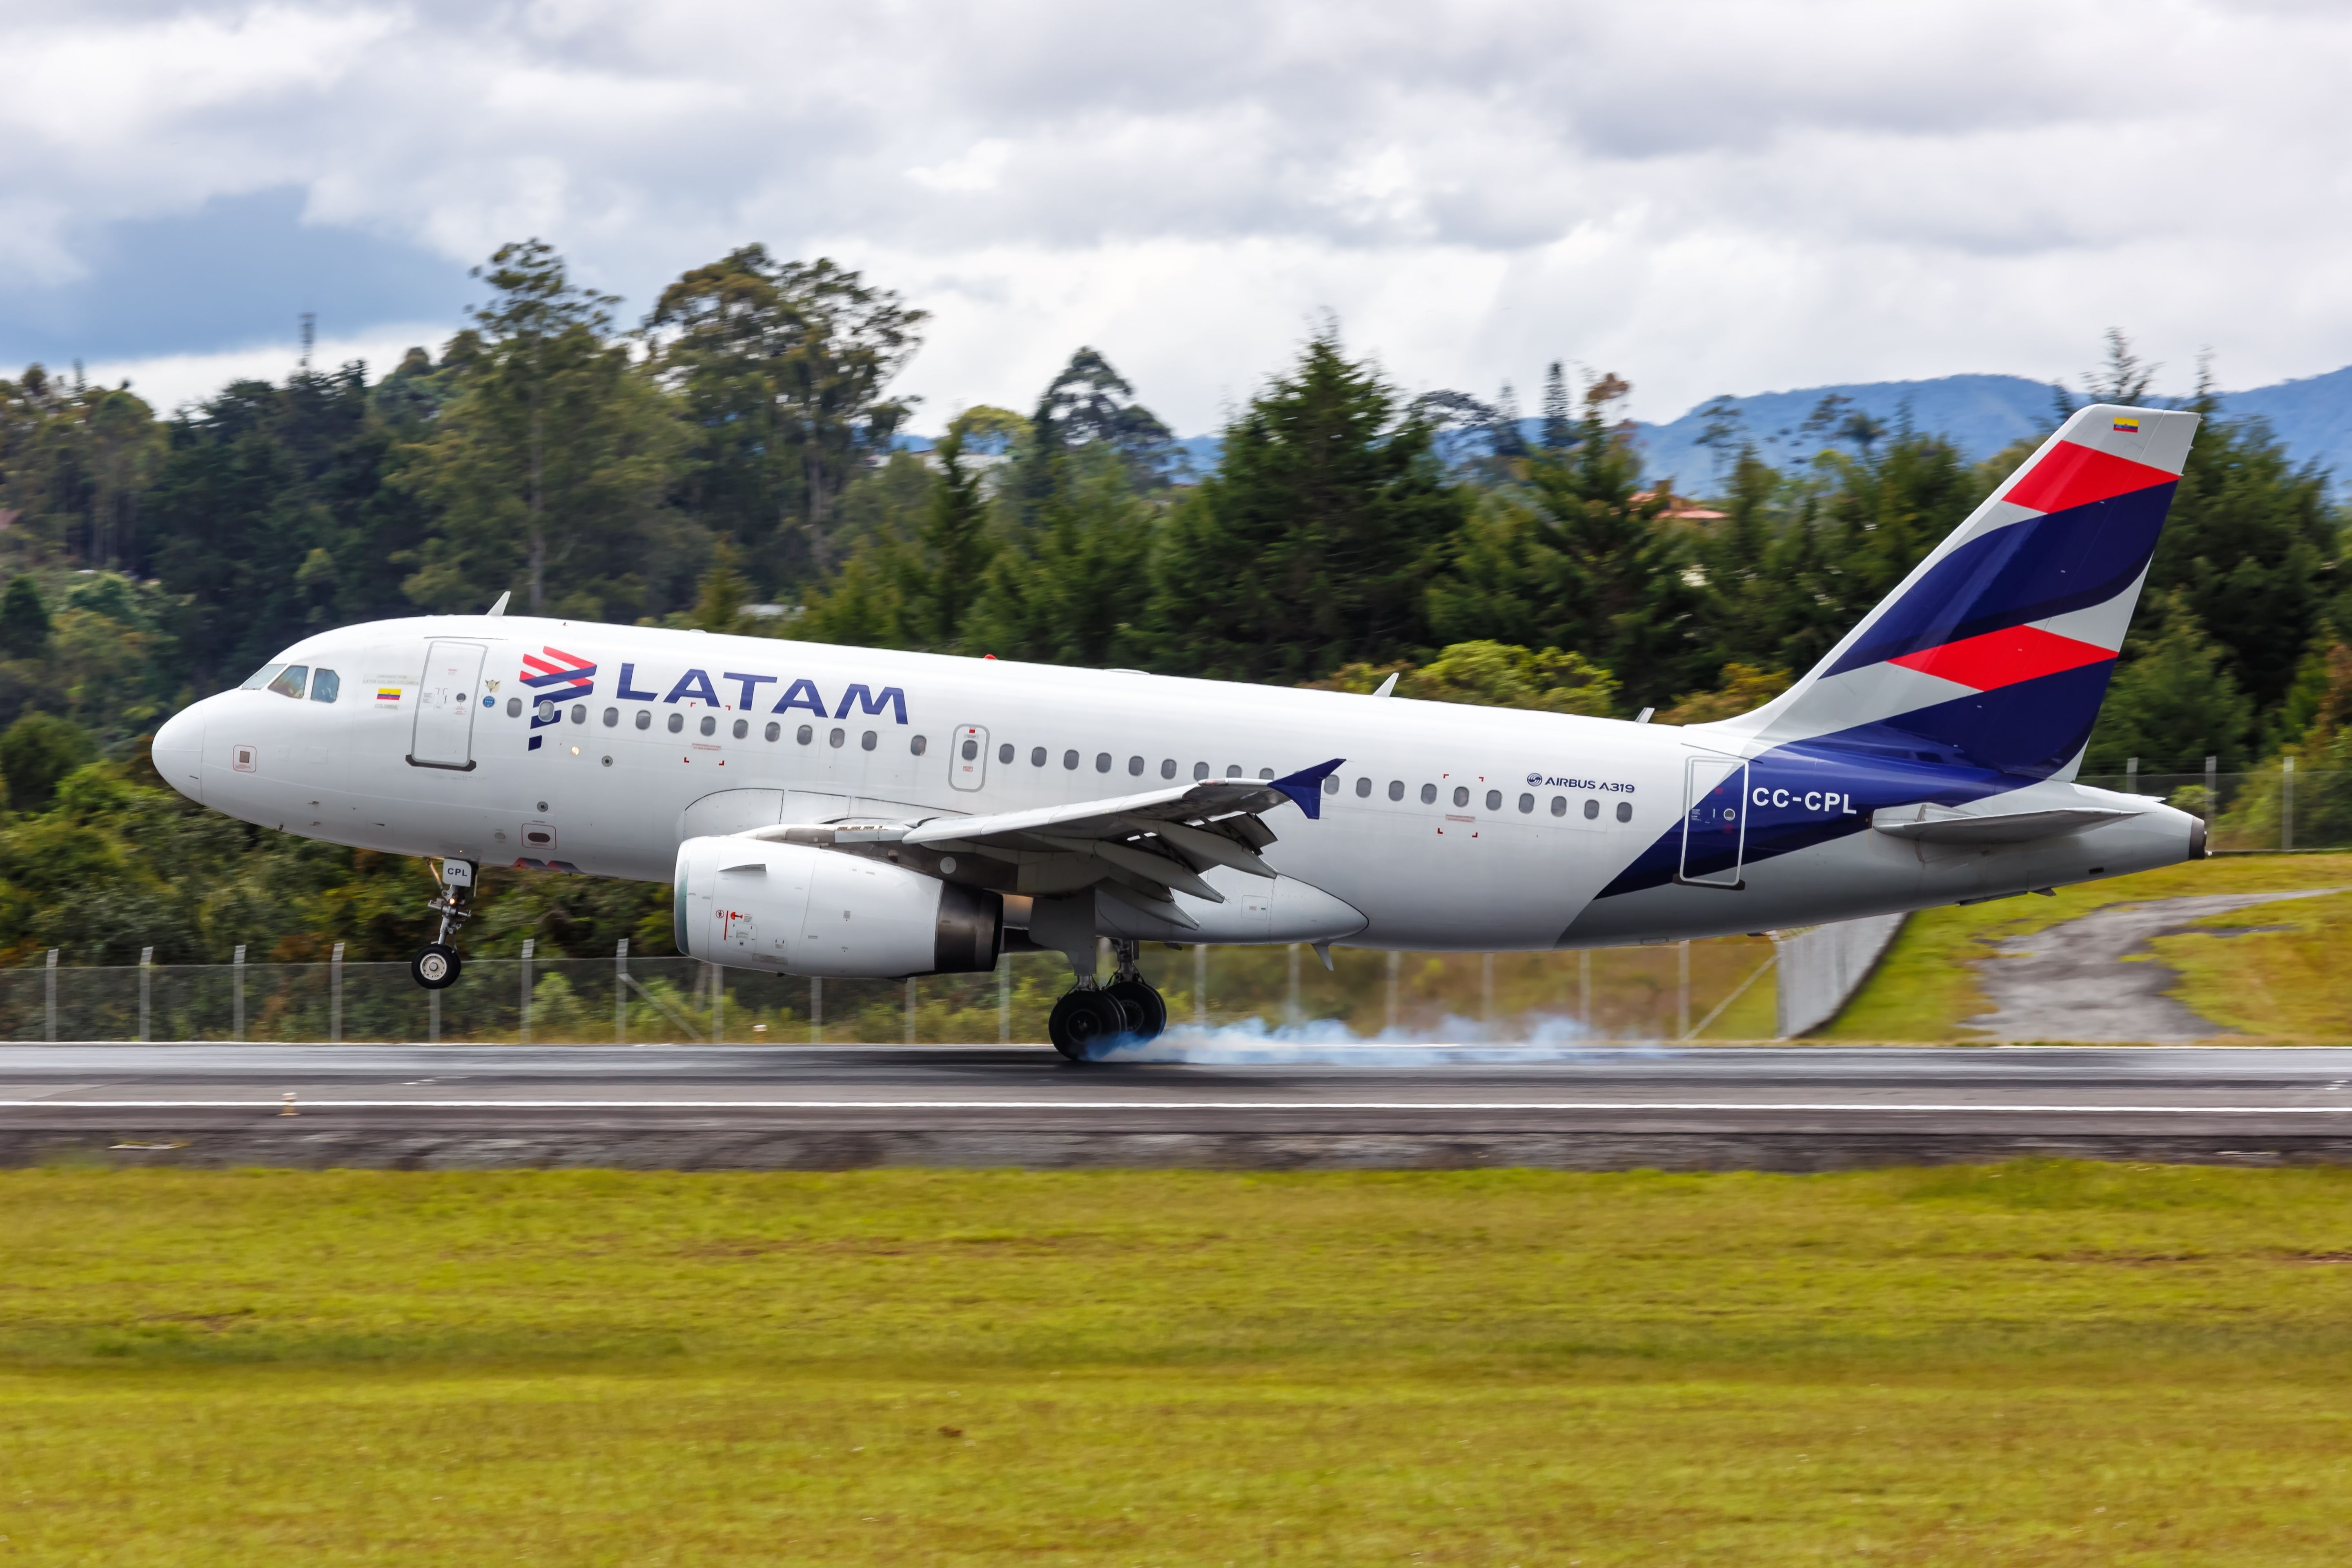 A LATAM Colombia aircraft 